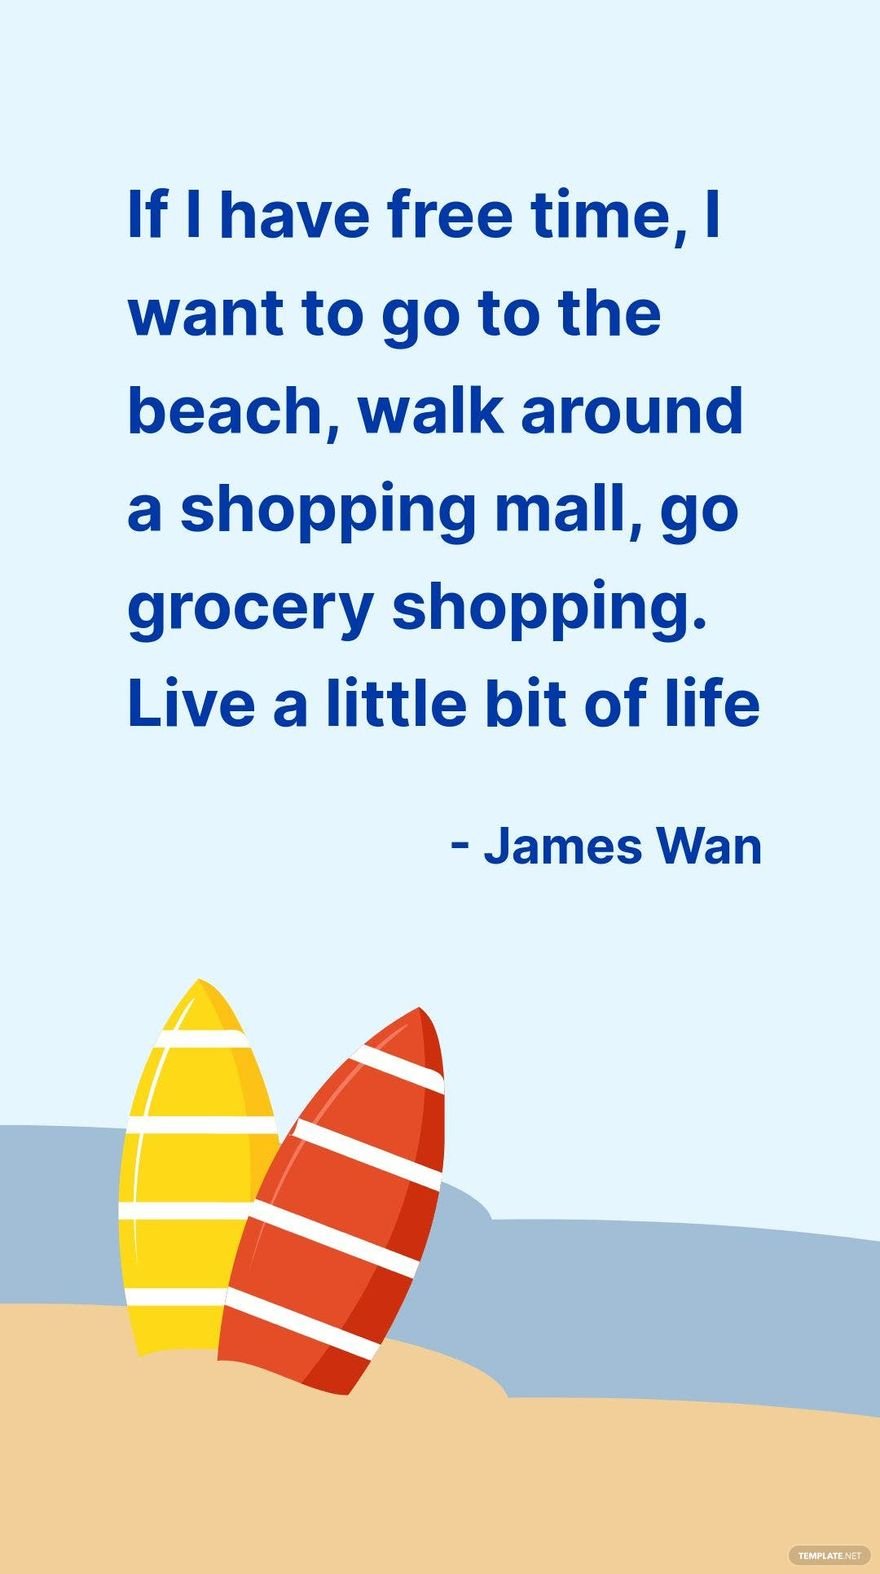 James Wan - If I have time, I want to go to the beach, walk around a shopping mall, go grocery shopping. Live a little bit of life in JPG